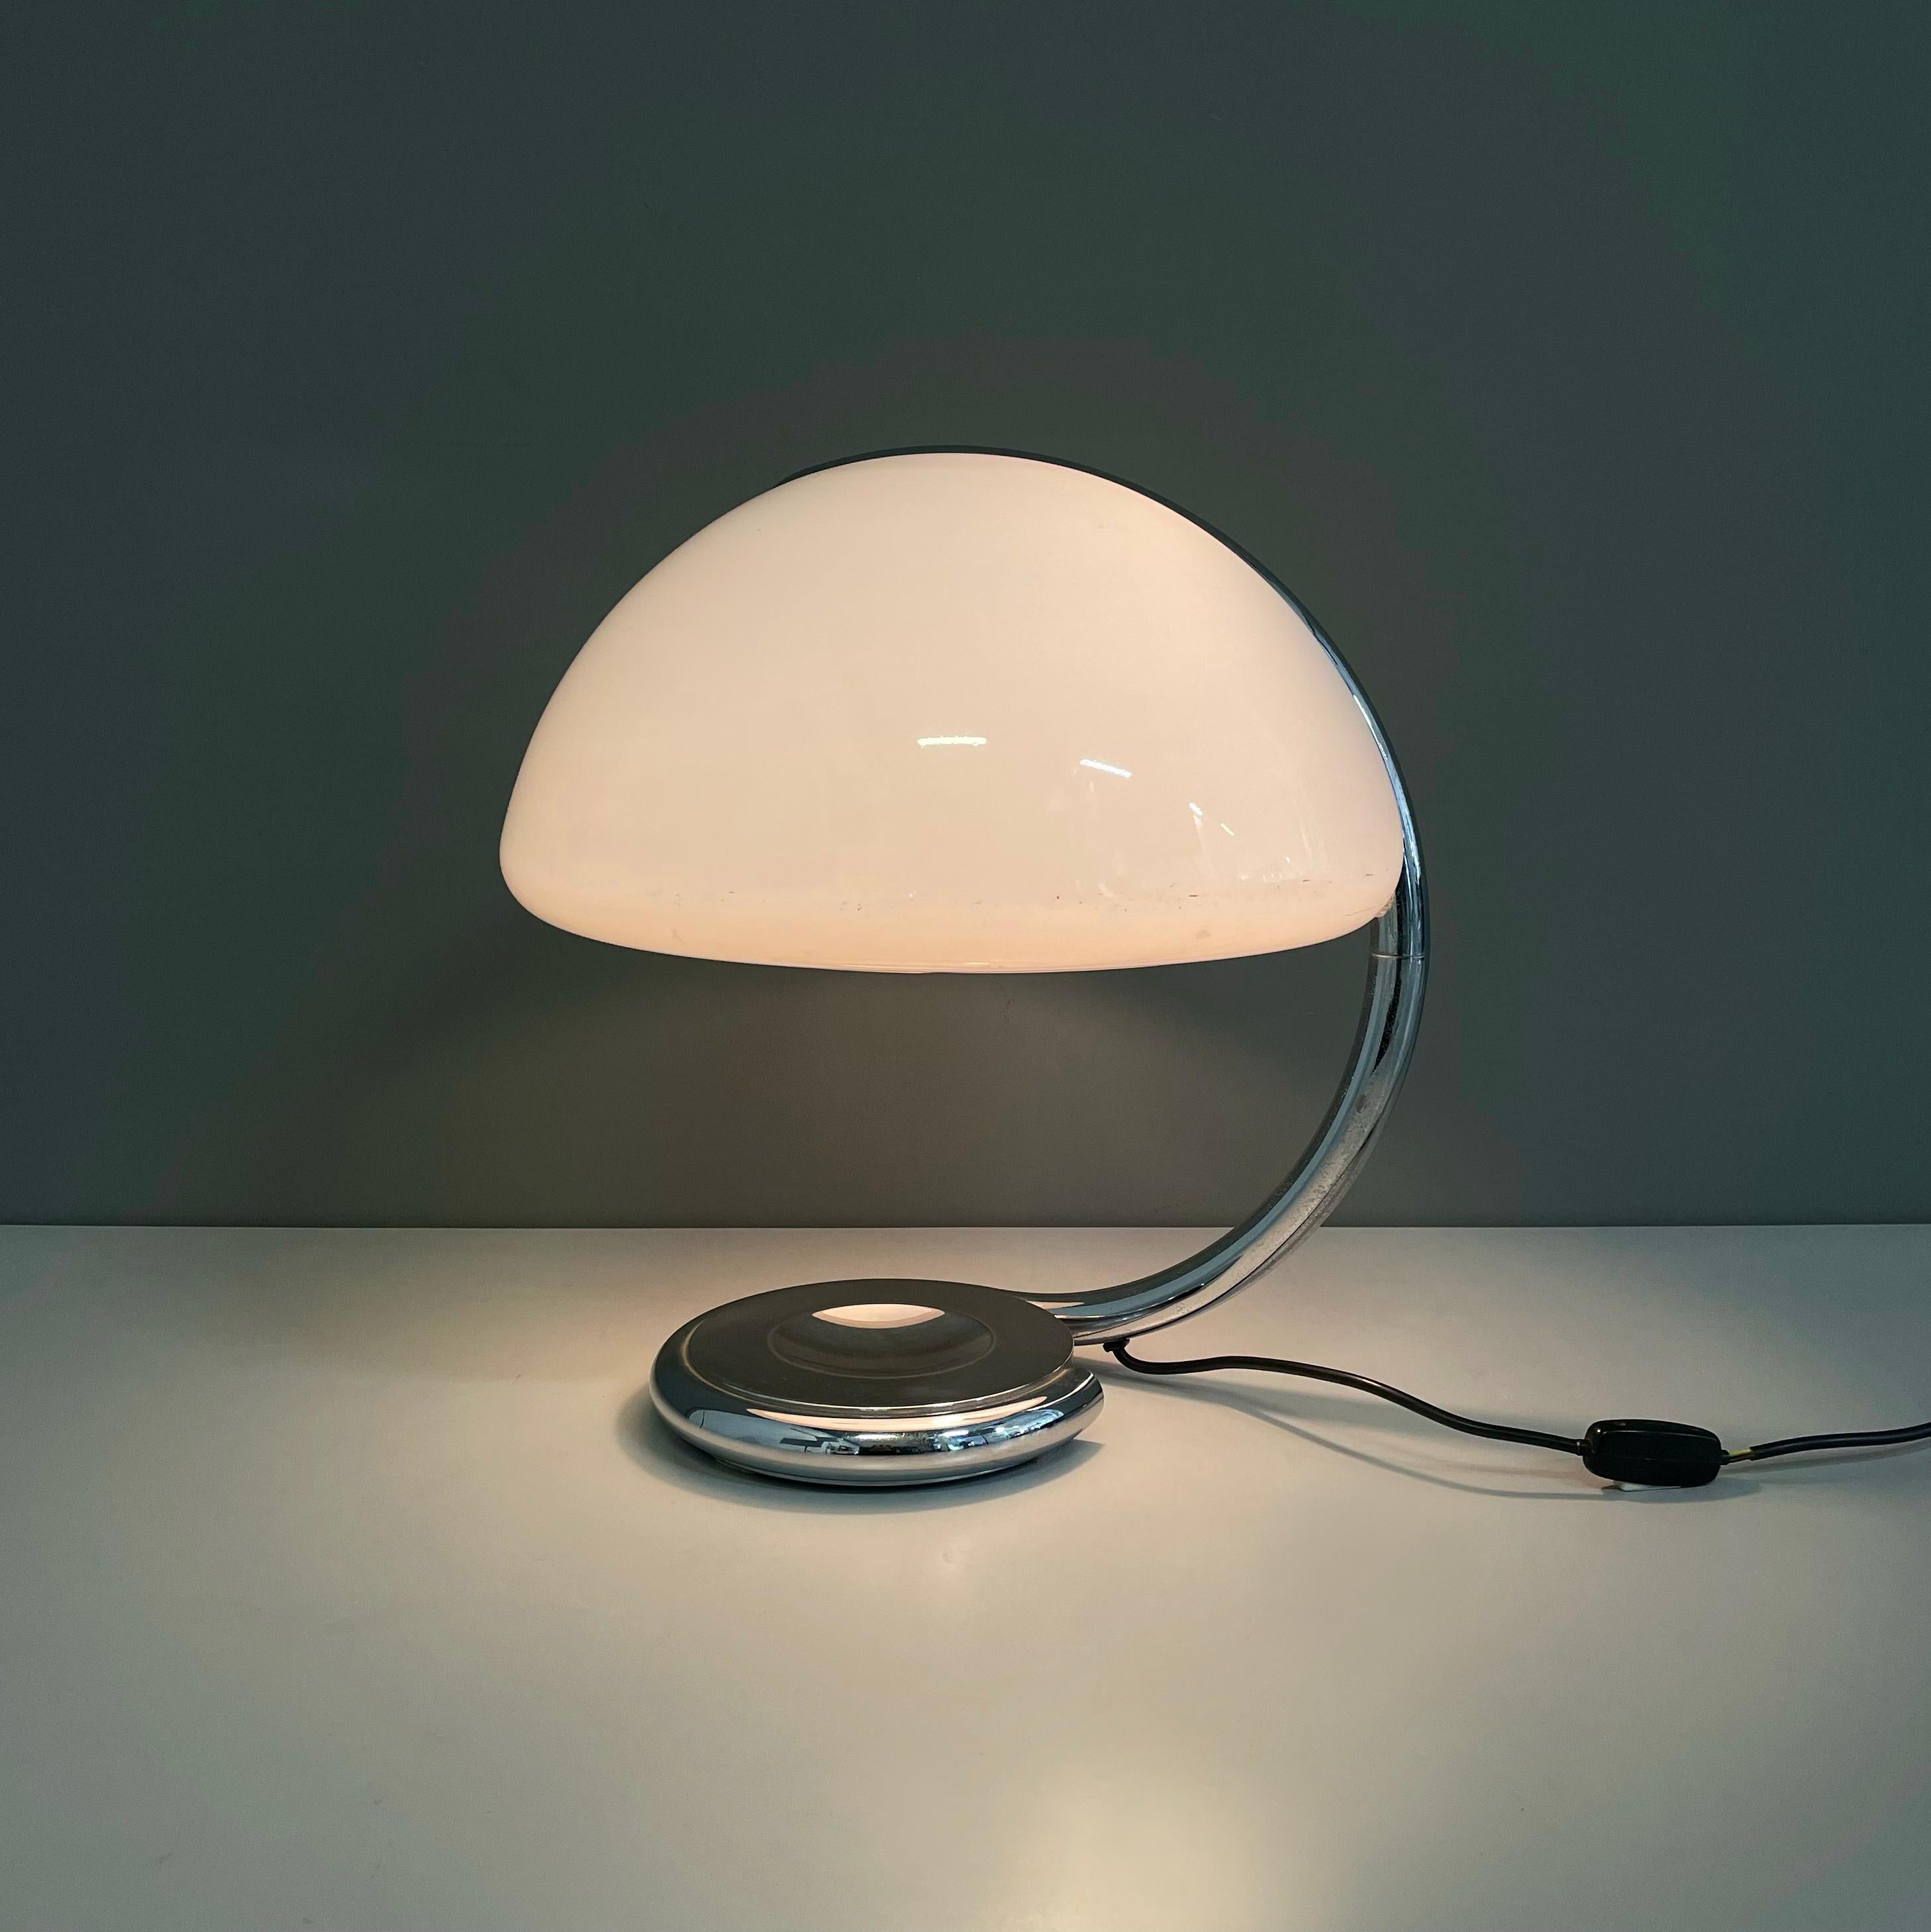 Italian space age Table lamp Serpente by Elio Martinelli for Martinelli Luce, 1970s
Table lamp mod. 599 Serpente with adjustable metal tubular structure. The semi-spherical lampshade is in opaline plexiglass. The rounded structure has a pin in the